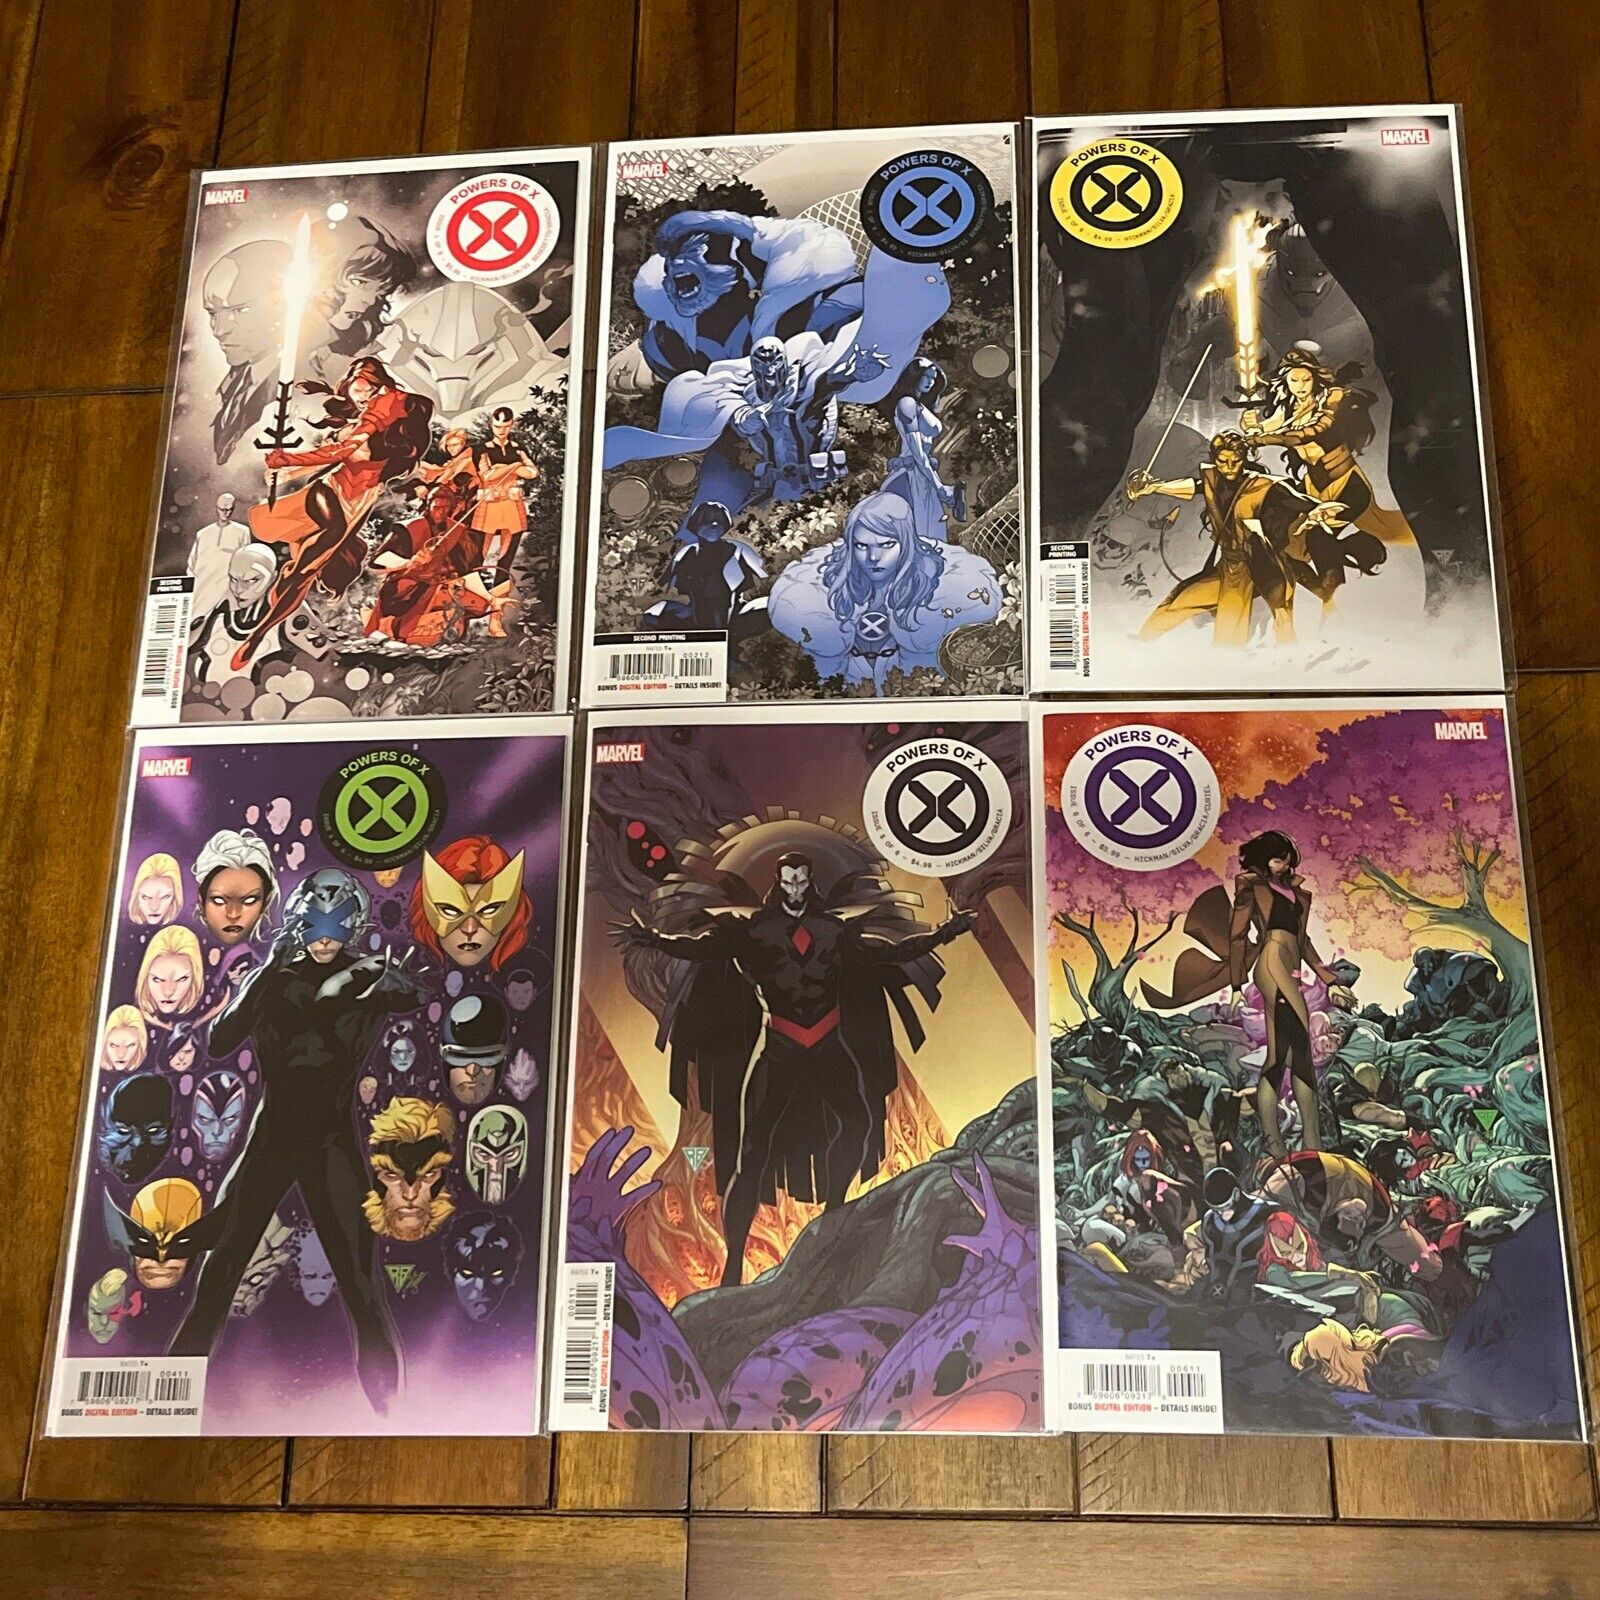 POWERS of X #1-6 (2019) Full Series / VERY HIGH Grade Lot of 6 Books Never Read